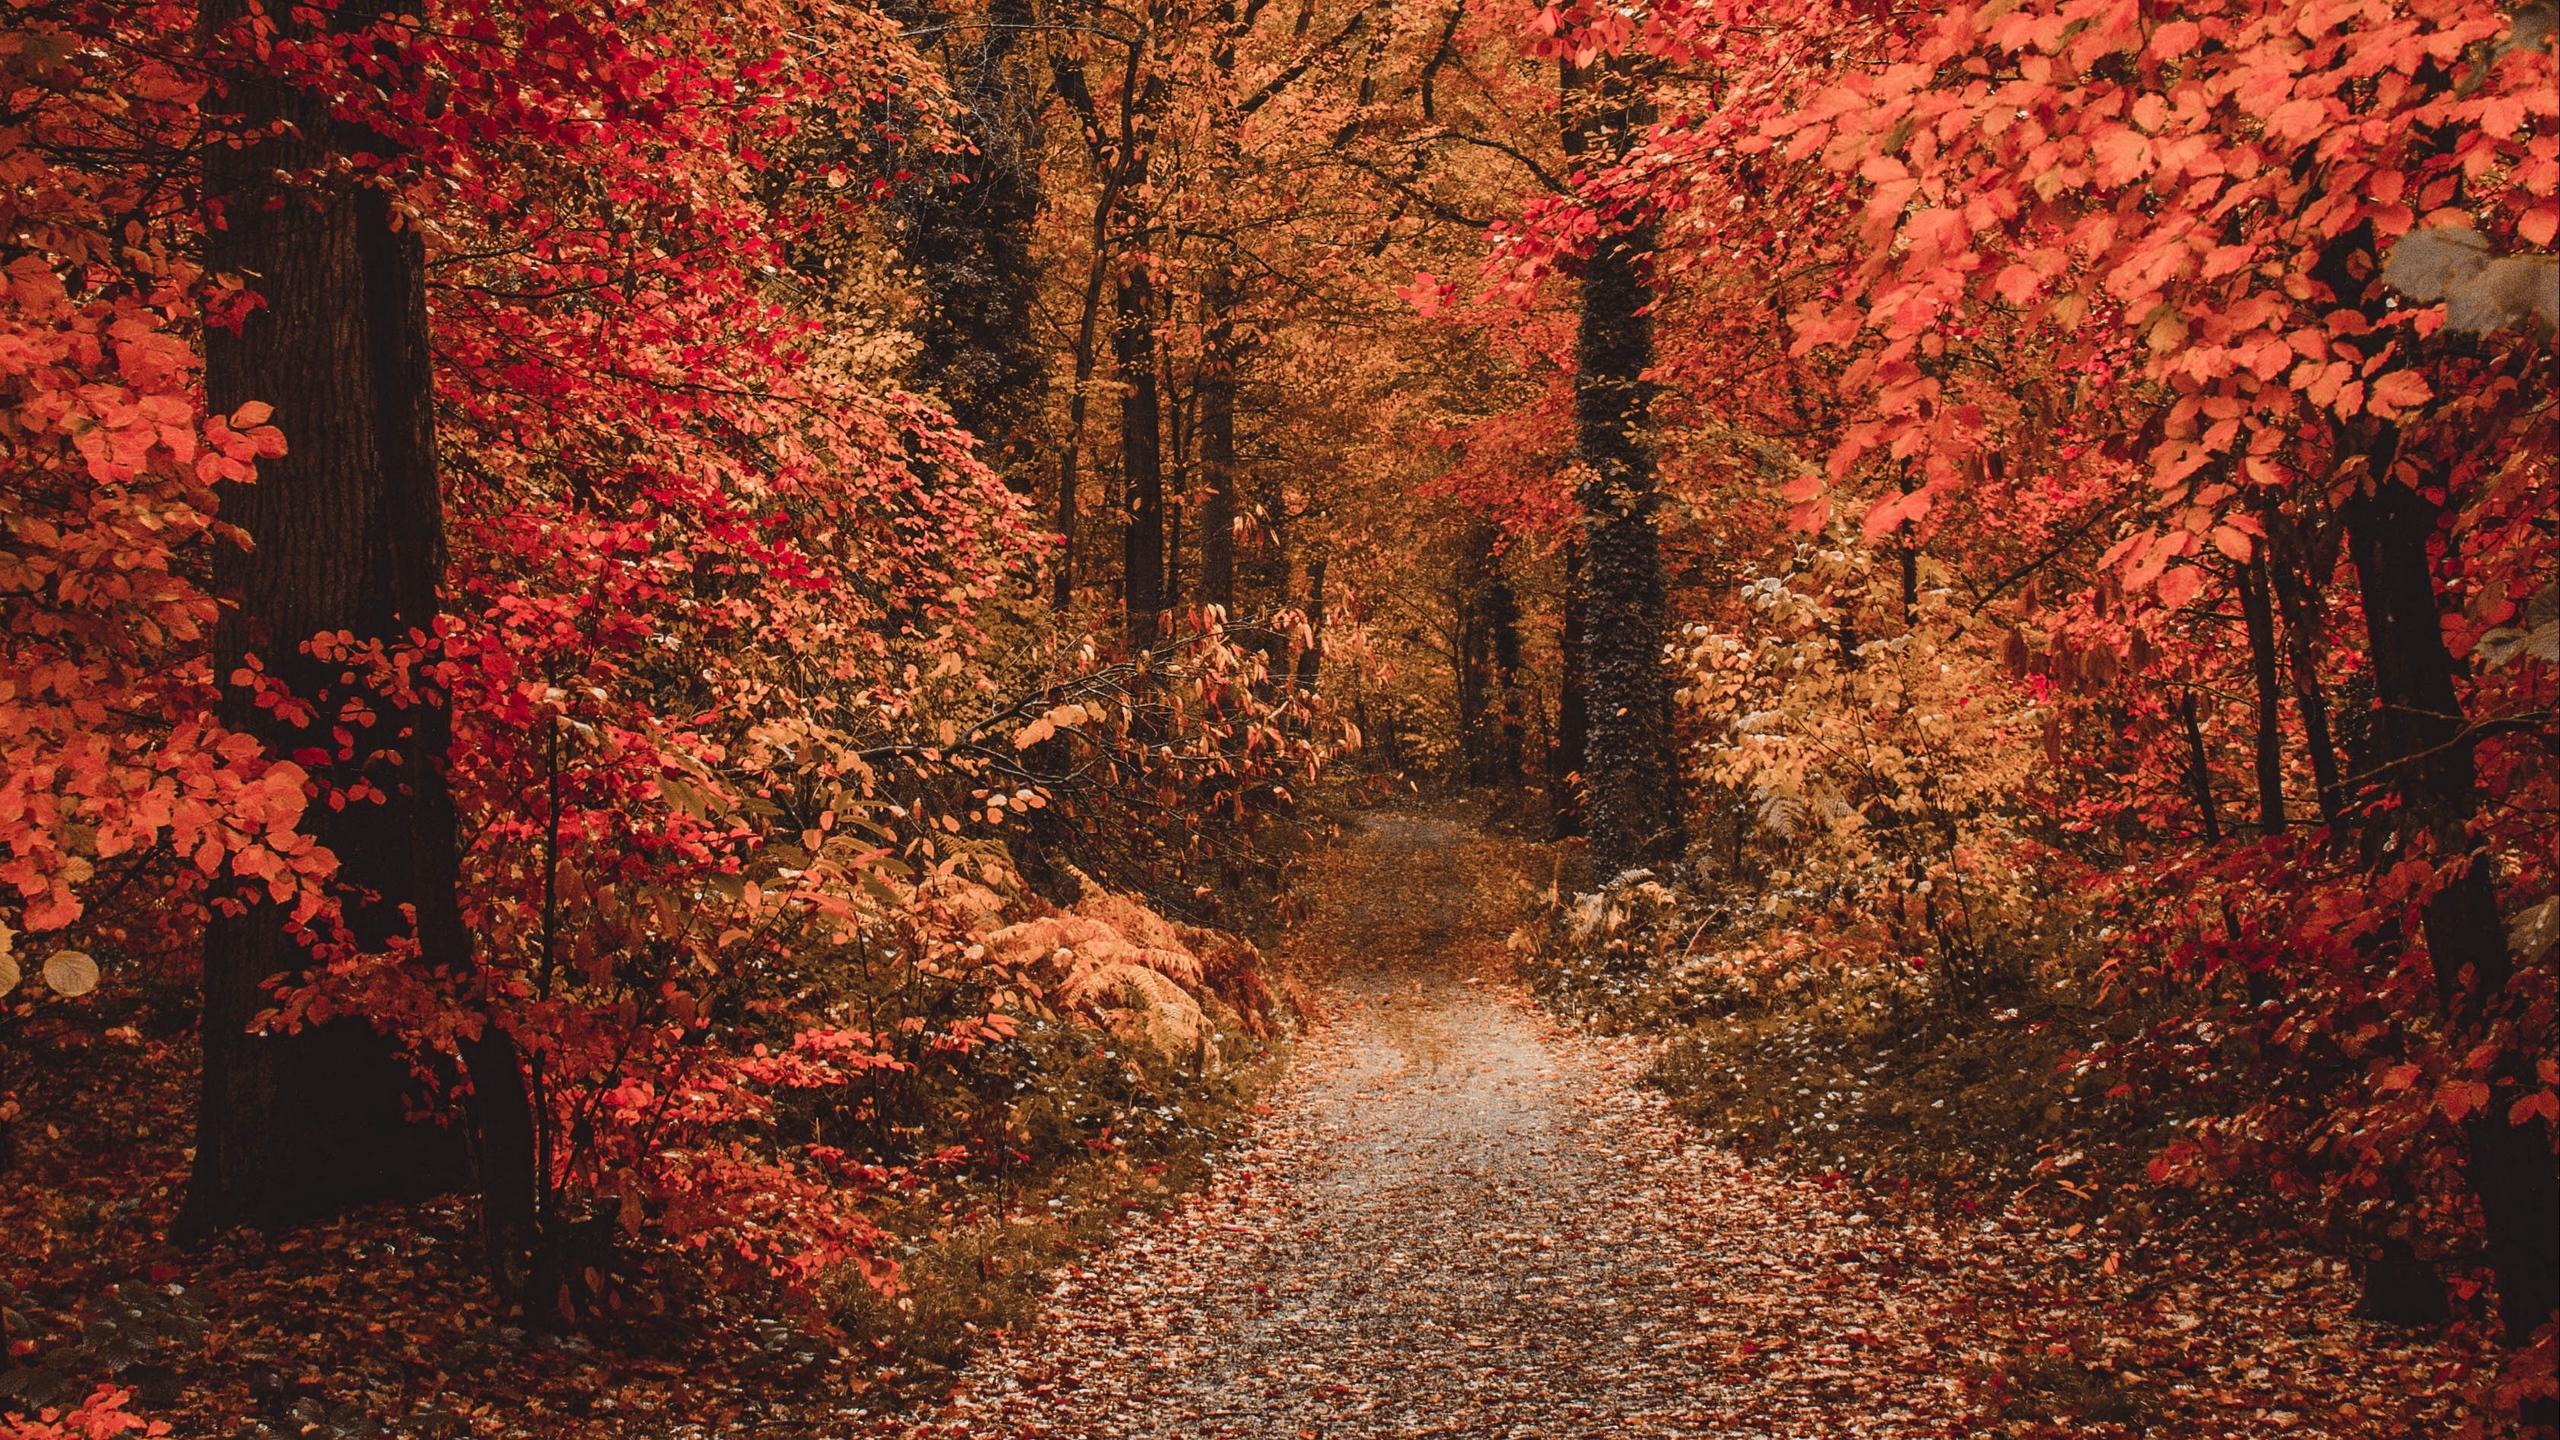 Download wallpaper 2560x1440 autumn, forest, path, foliage